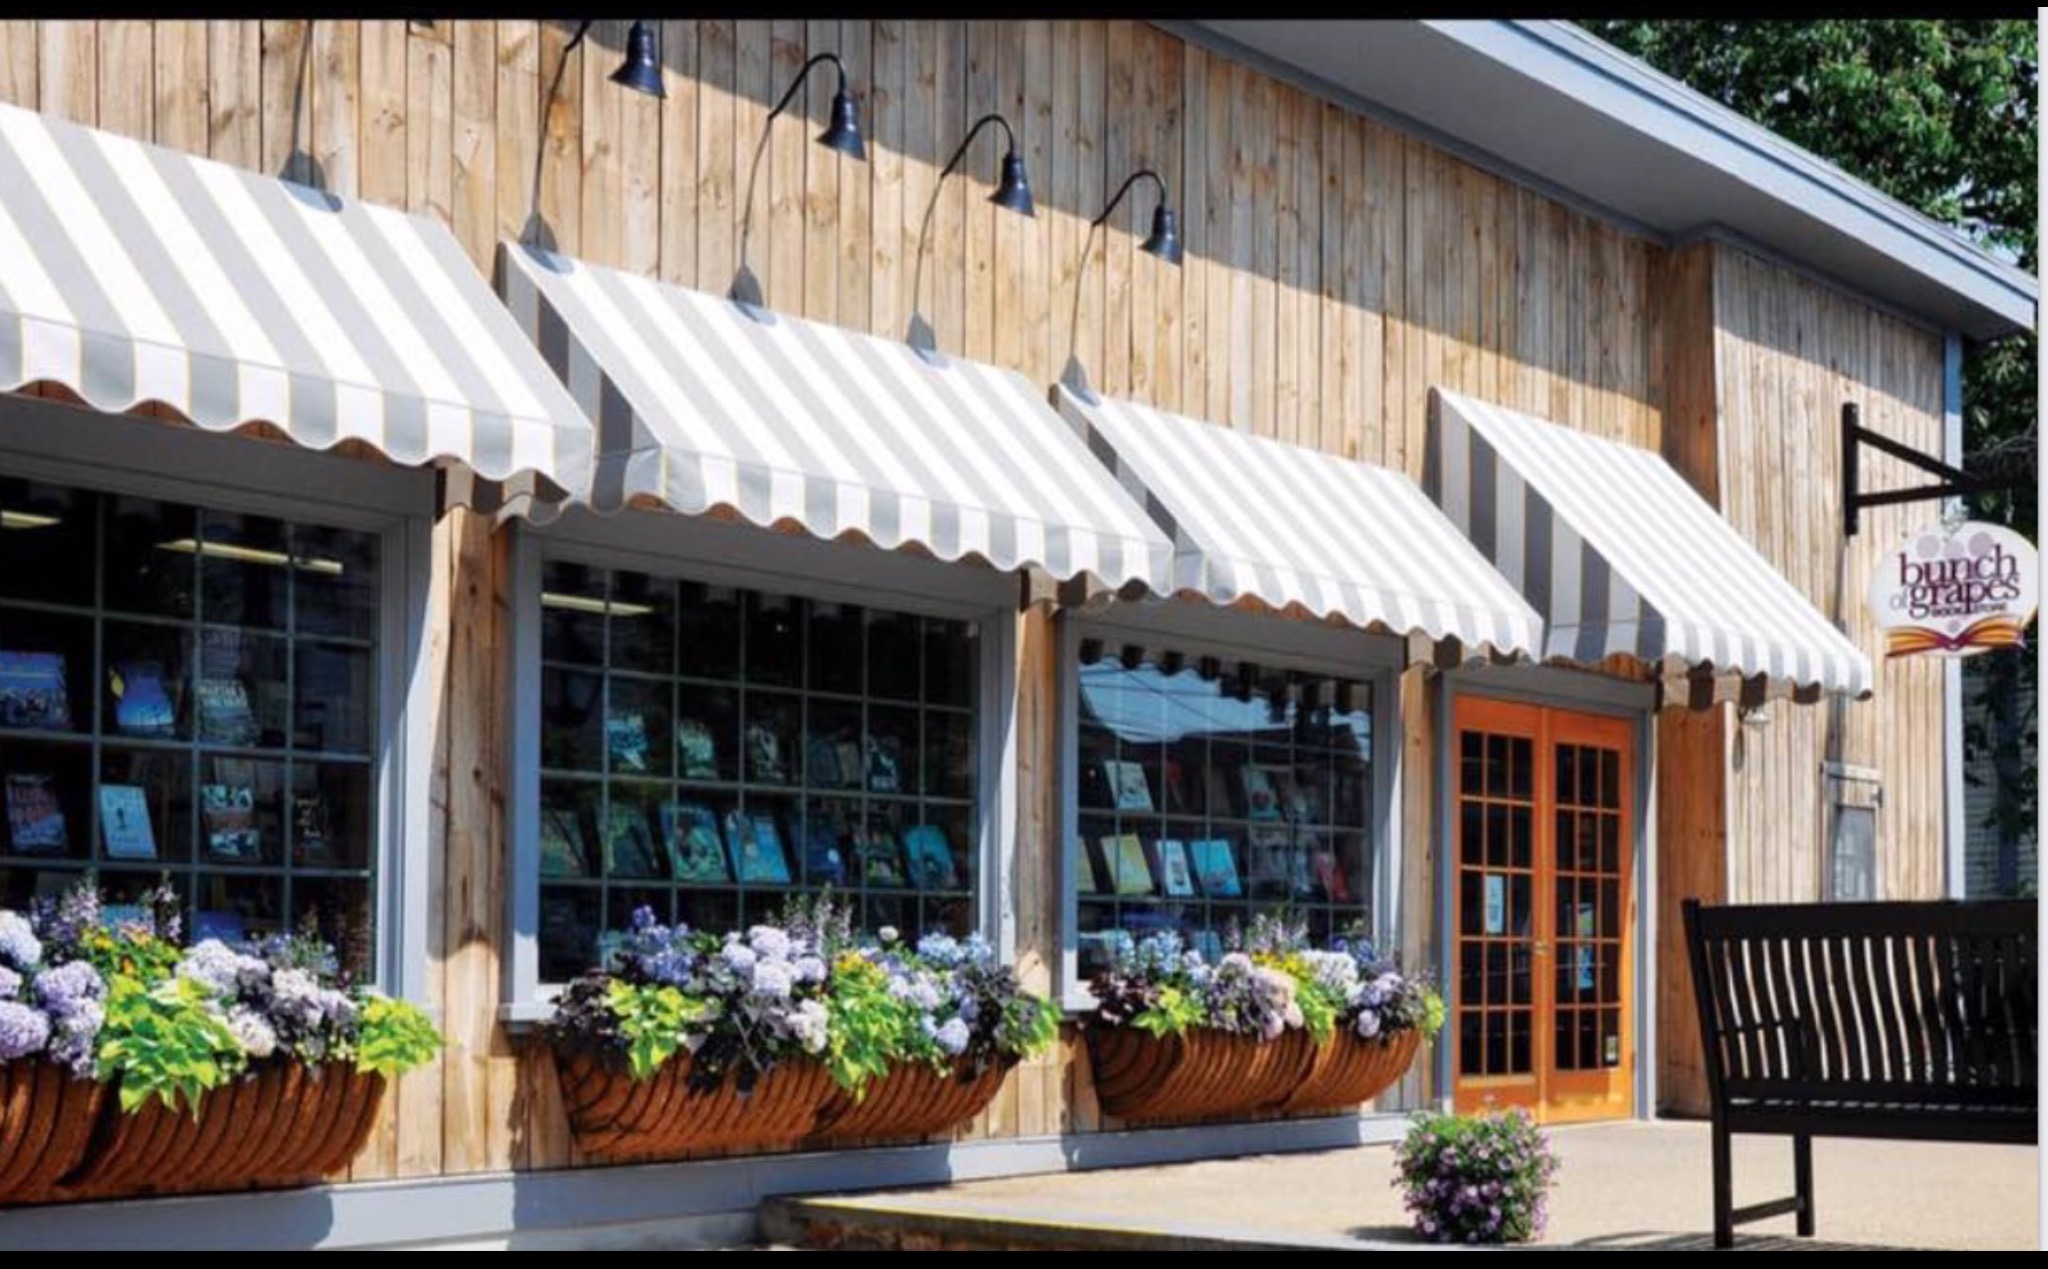 Bunches of Grapes Bookstore